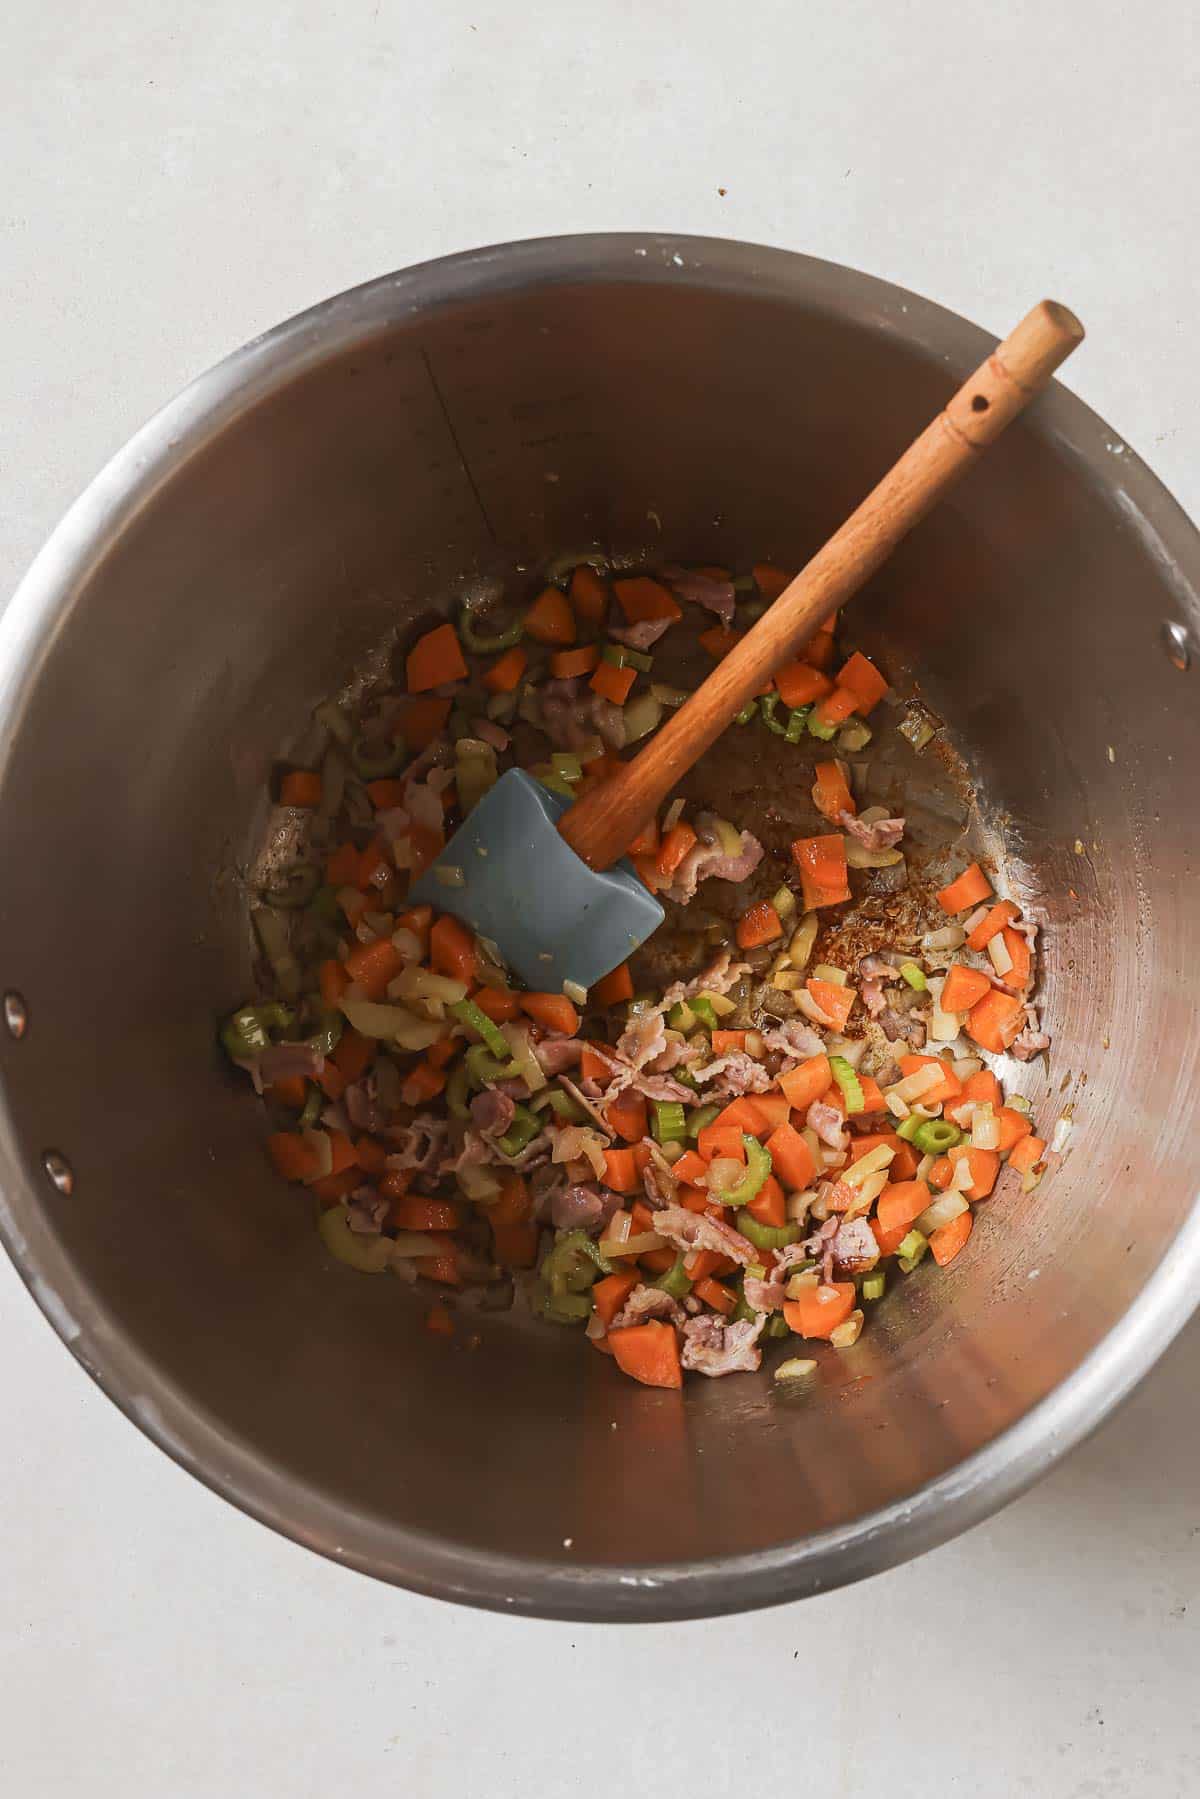 Diced vegetables with a wooden spatula in a stainless steel cooking pot.